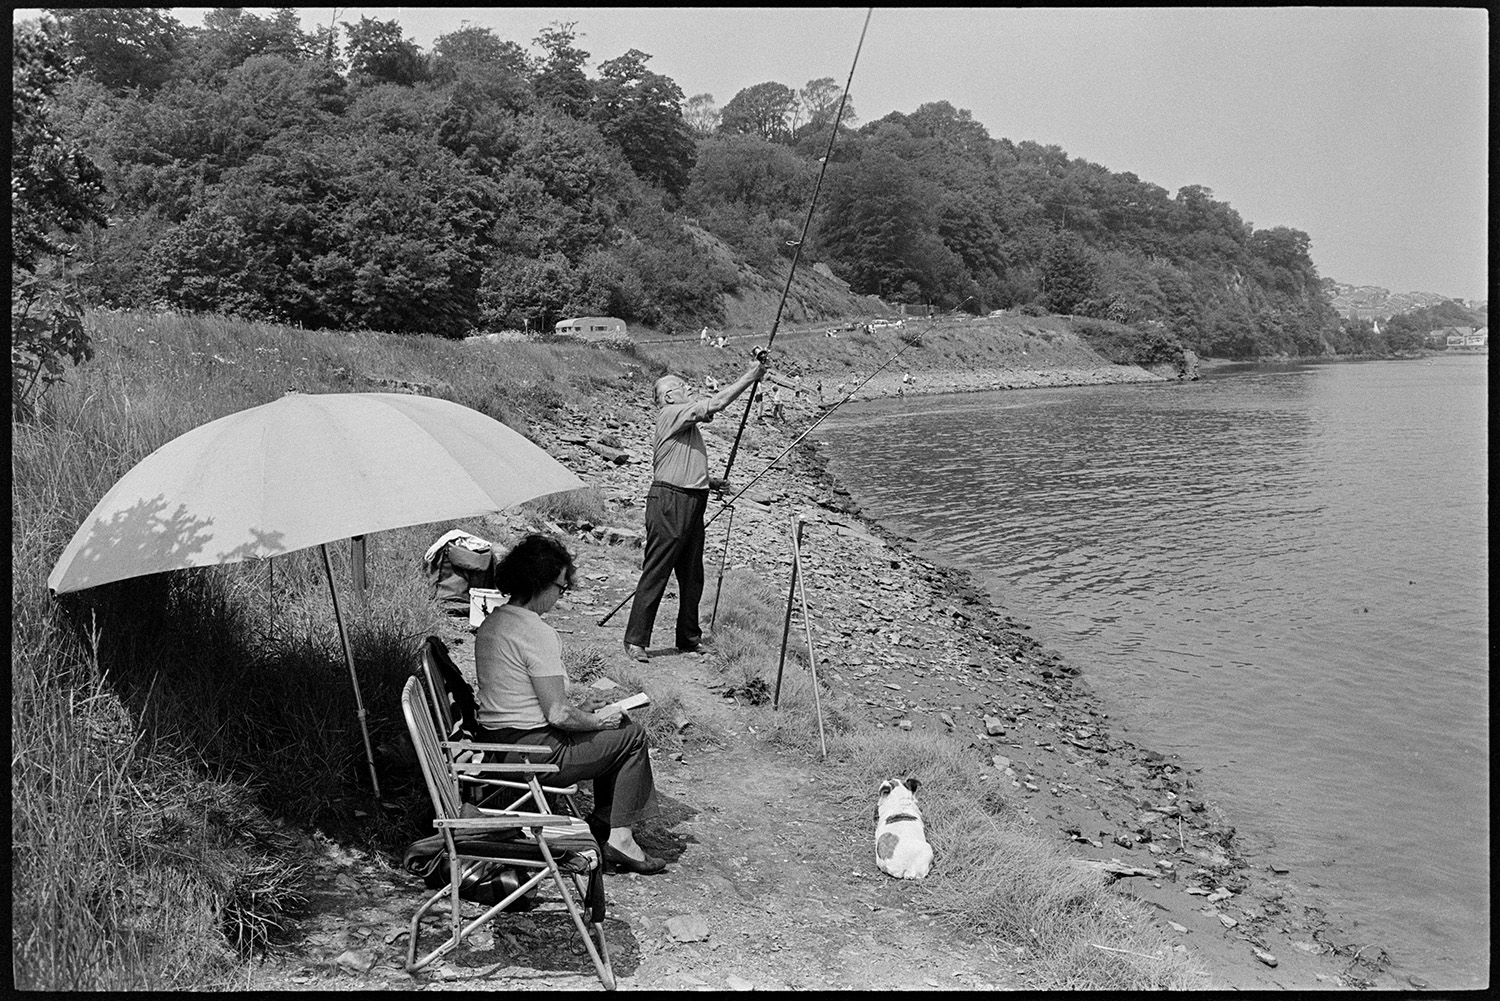 People fishing and having picnic beside estuary, tourists. 
[A man fishing on the River Torridge estuary at Bideford. A woman is sat reading a book under a large parasol, and a dog is sitting at the estuary edge watching the man fishing.]